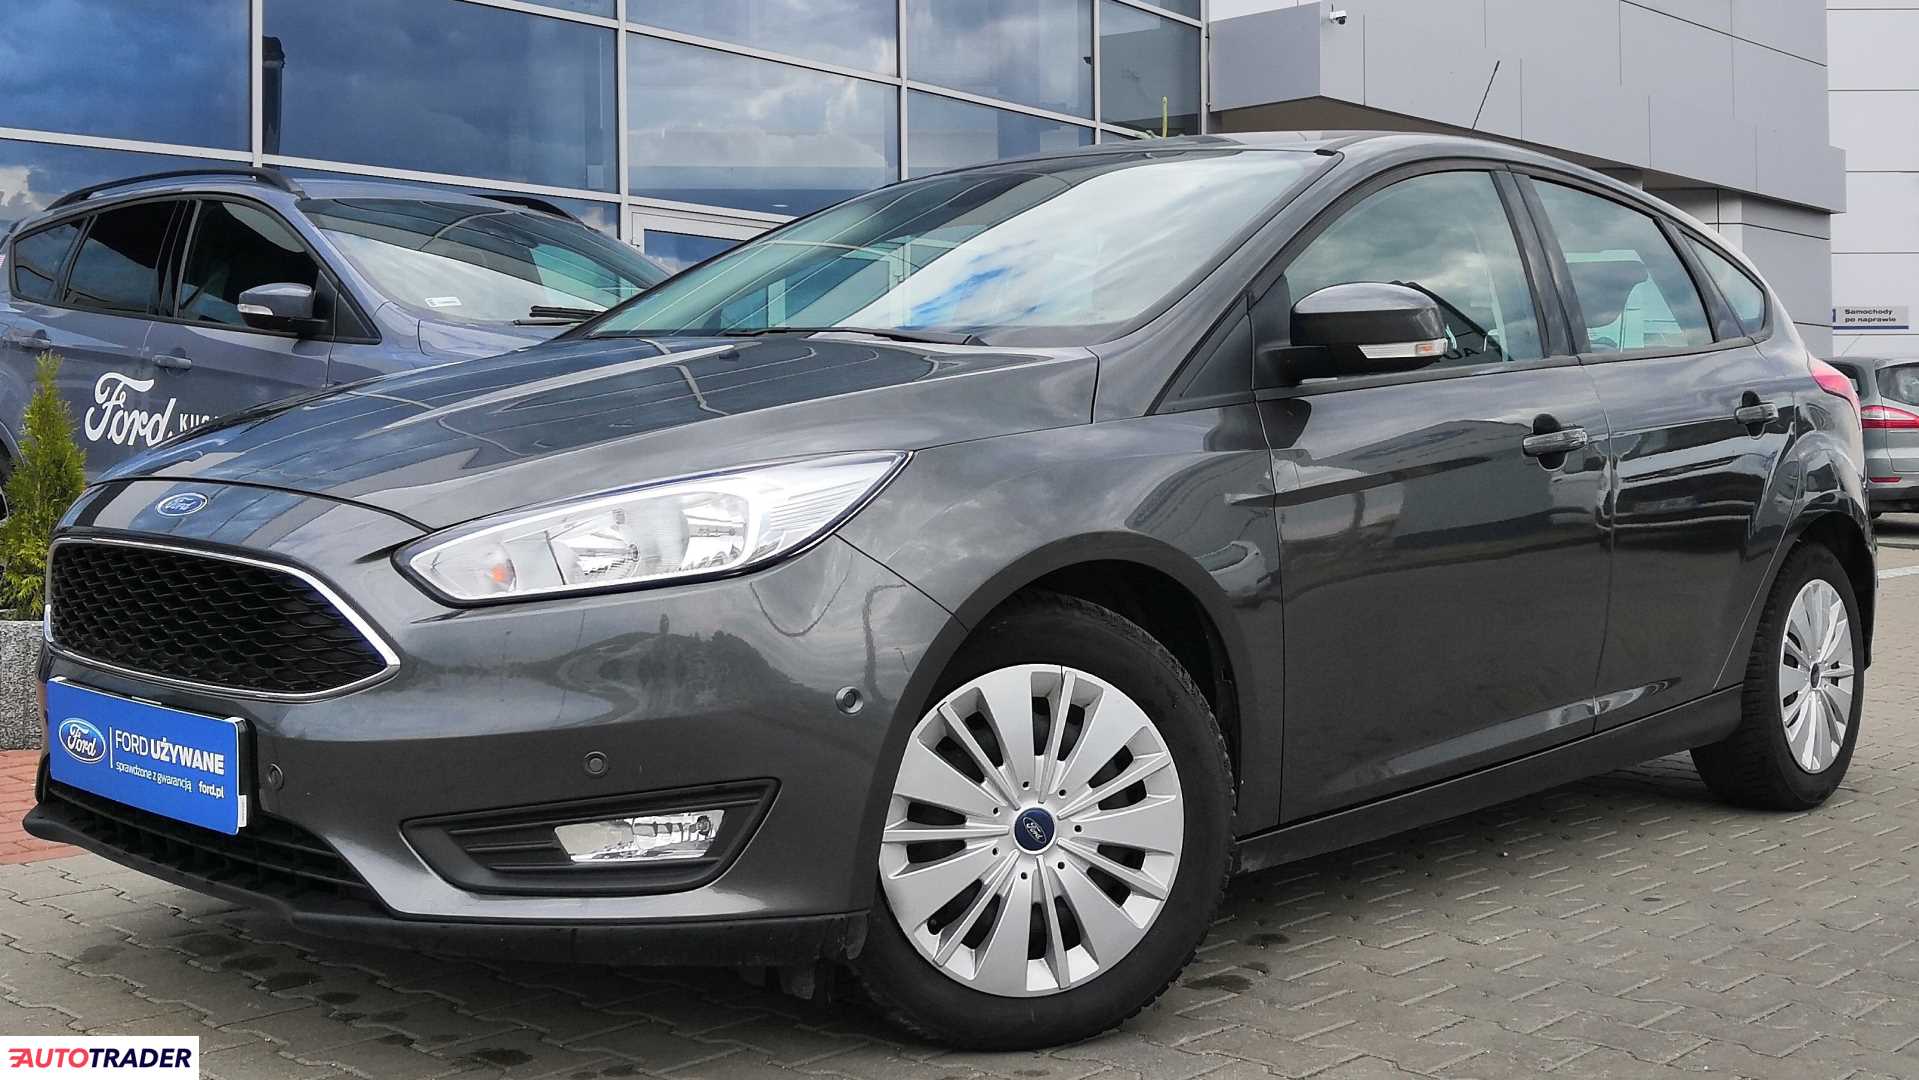 Ford Focus 2015 1.6 125 KM